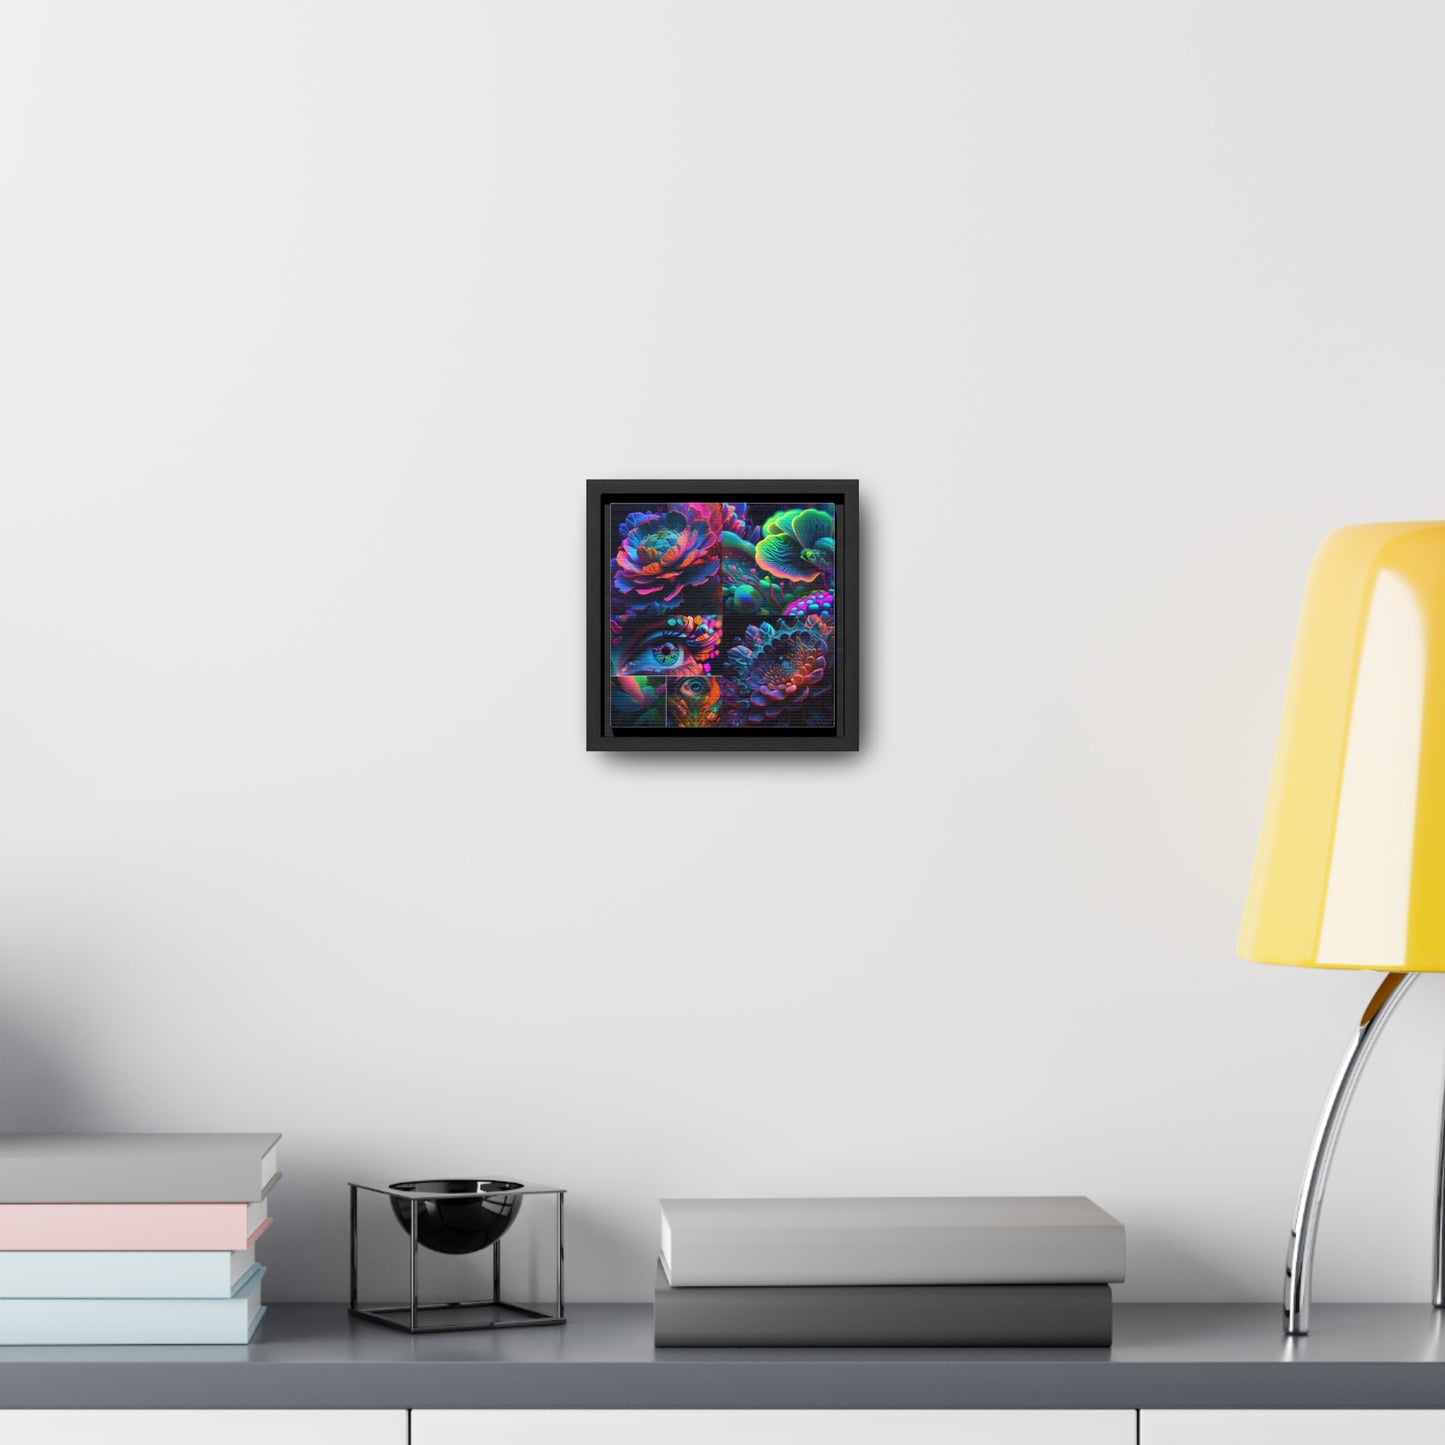 Gallery Canvas Wraps, Square Frame Neon Florescent Glow